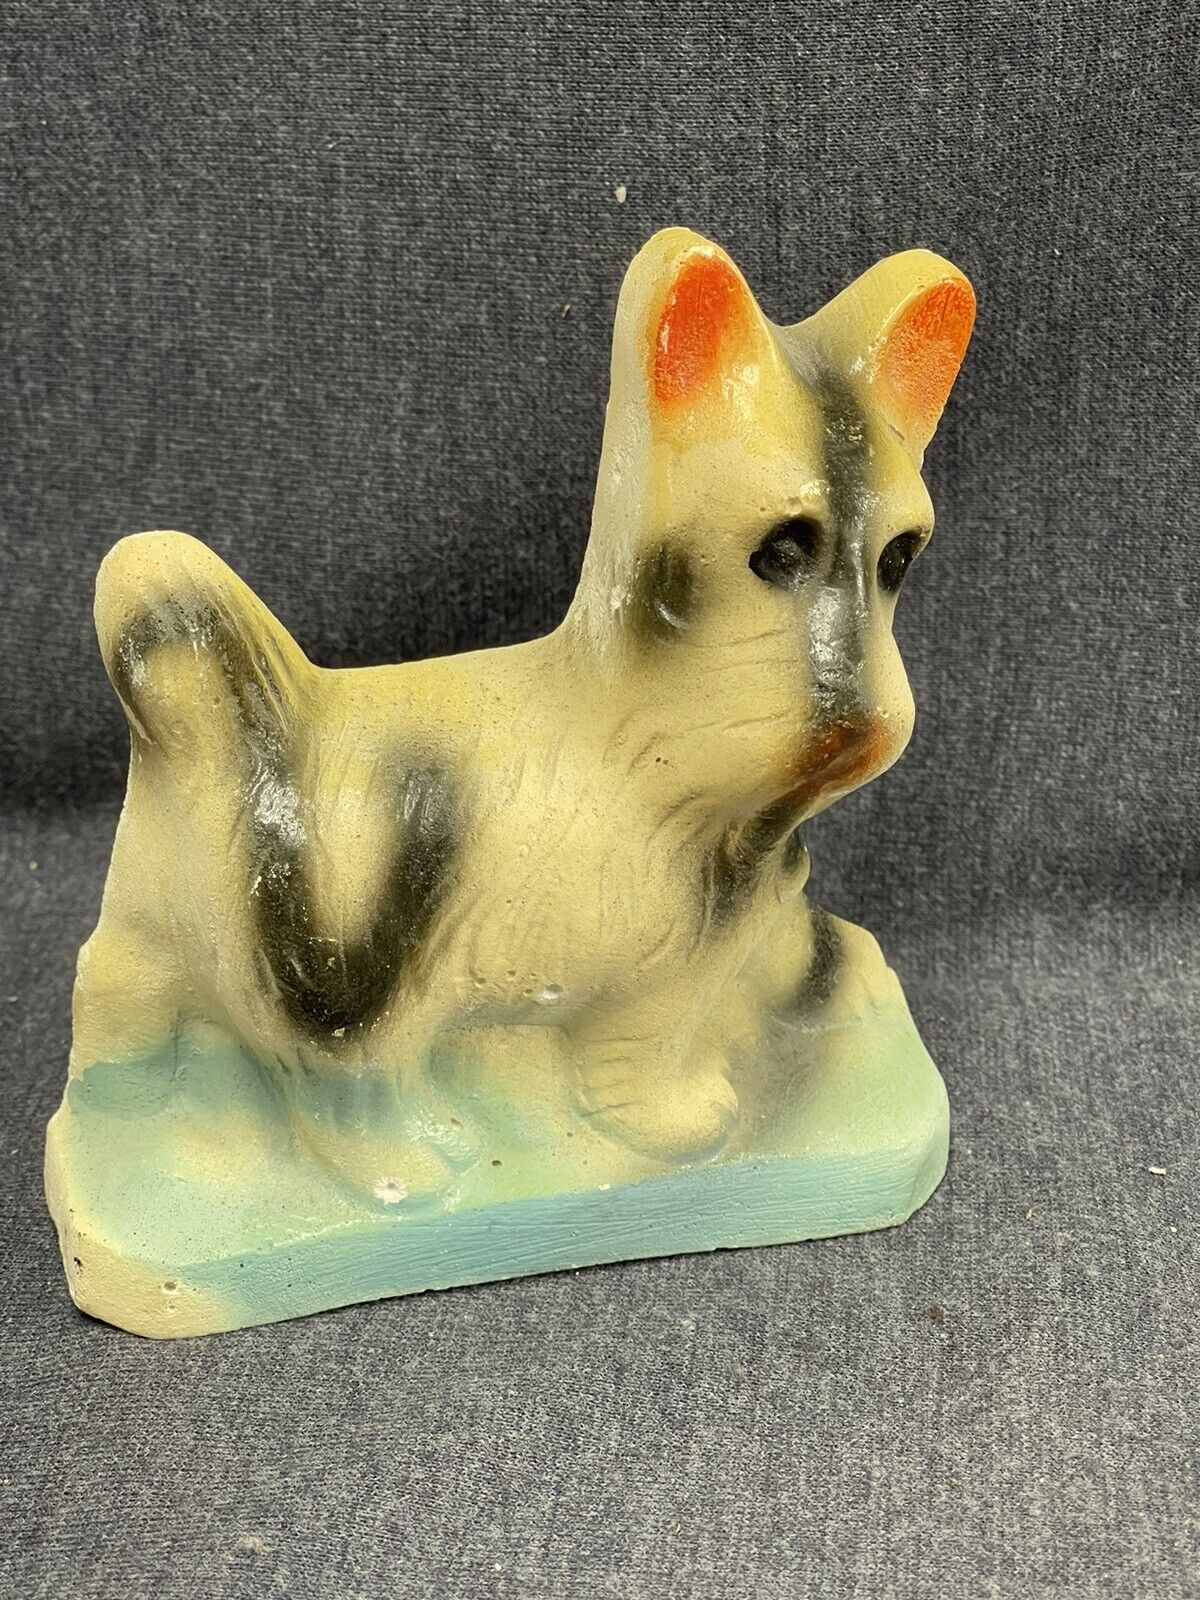 Vintage 5 1/2” Tall Carnival Chalkware Scotty Dog 1930's